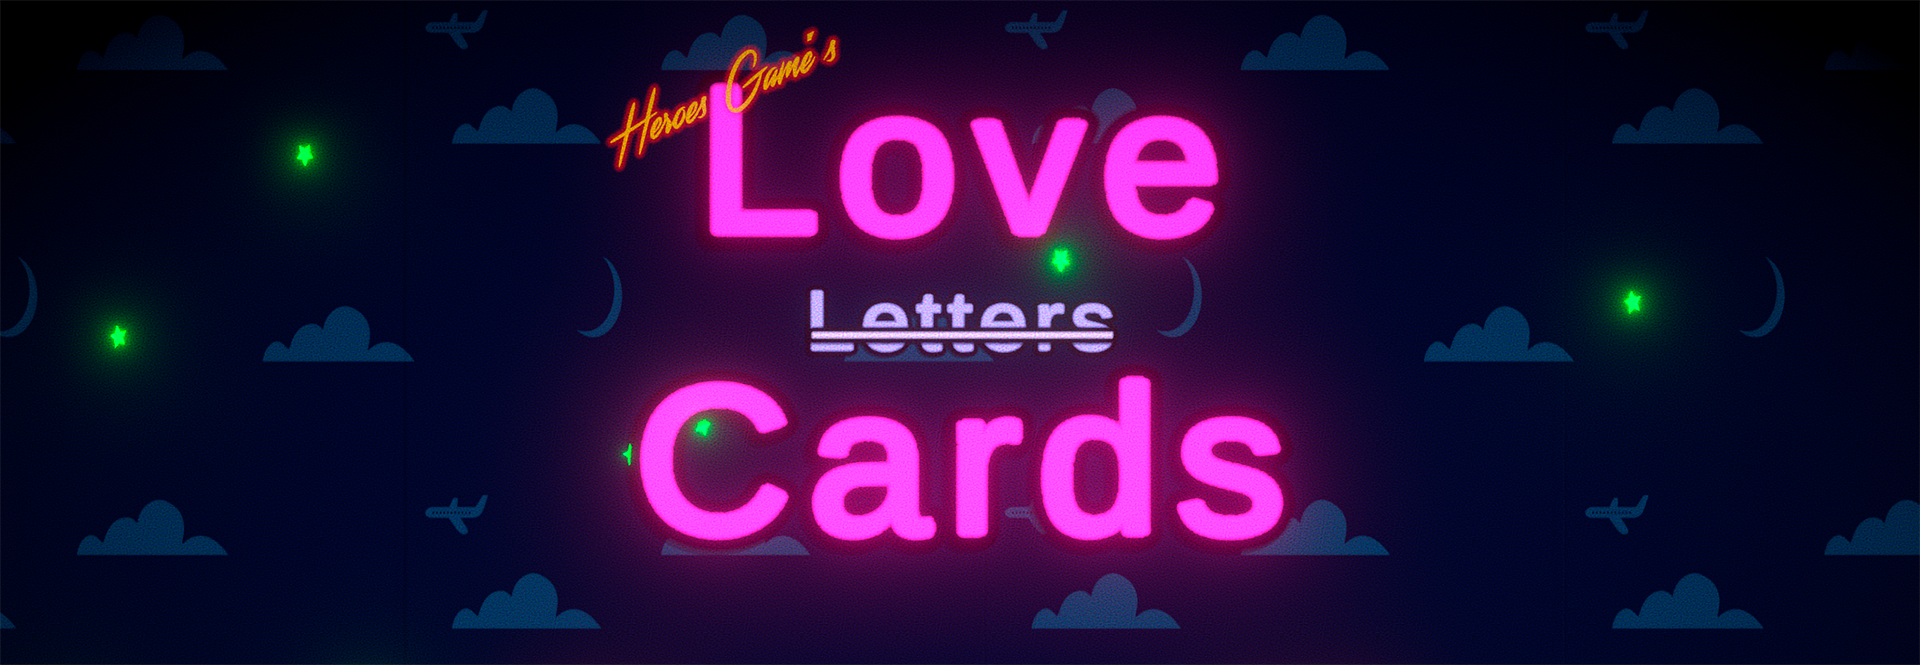 Love letters Cards